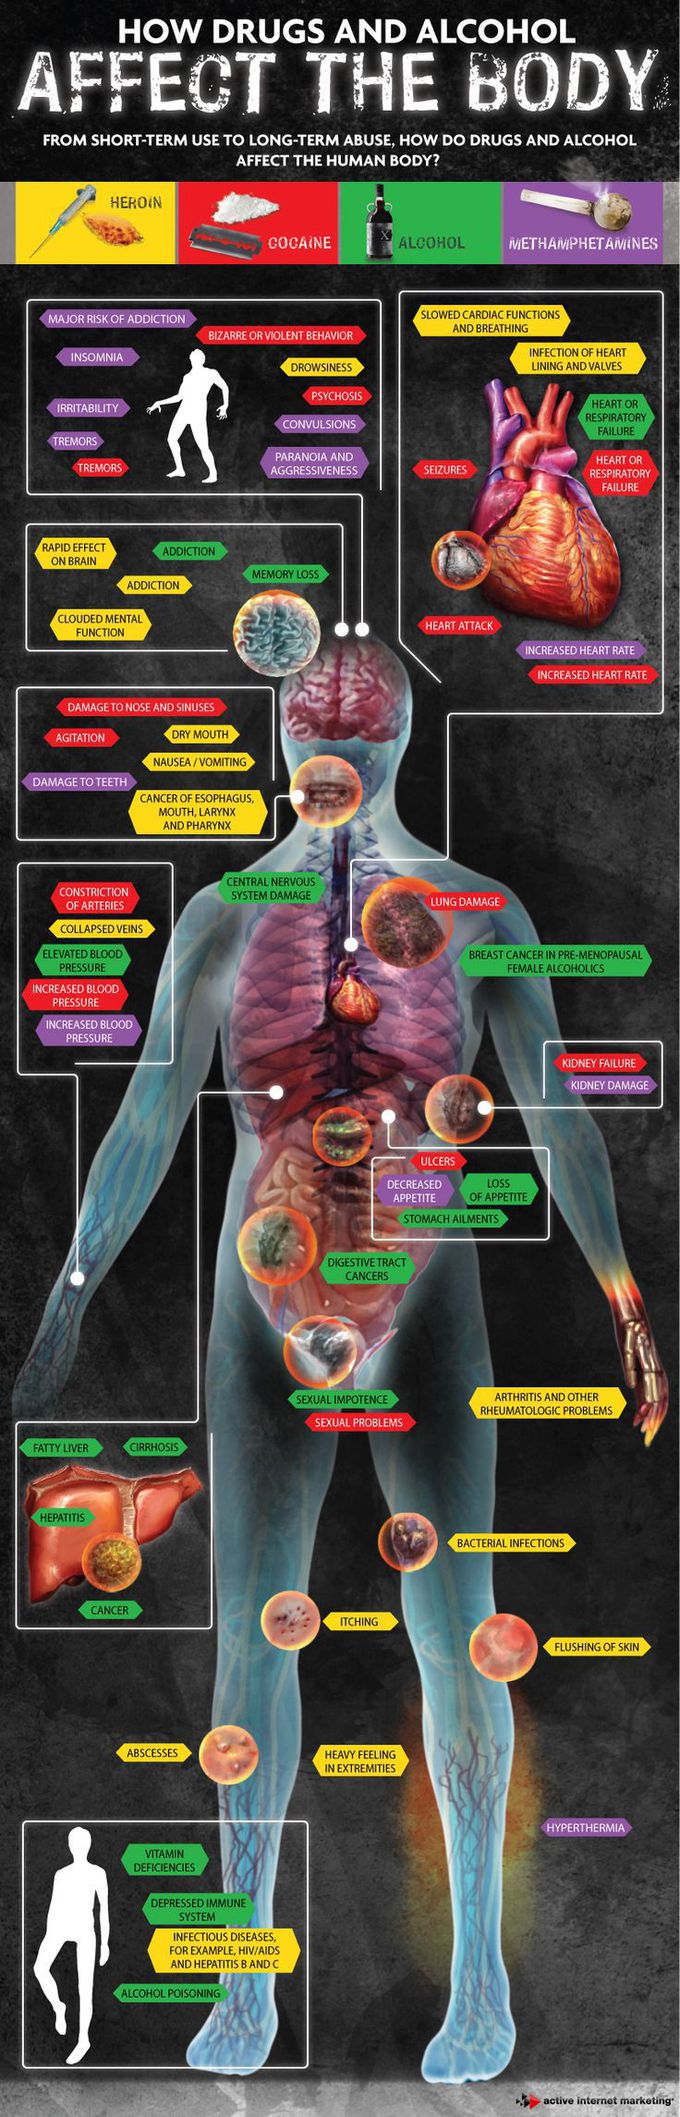 How drugs and alcohol affect the body